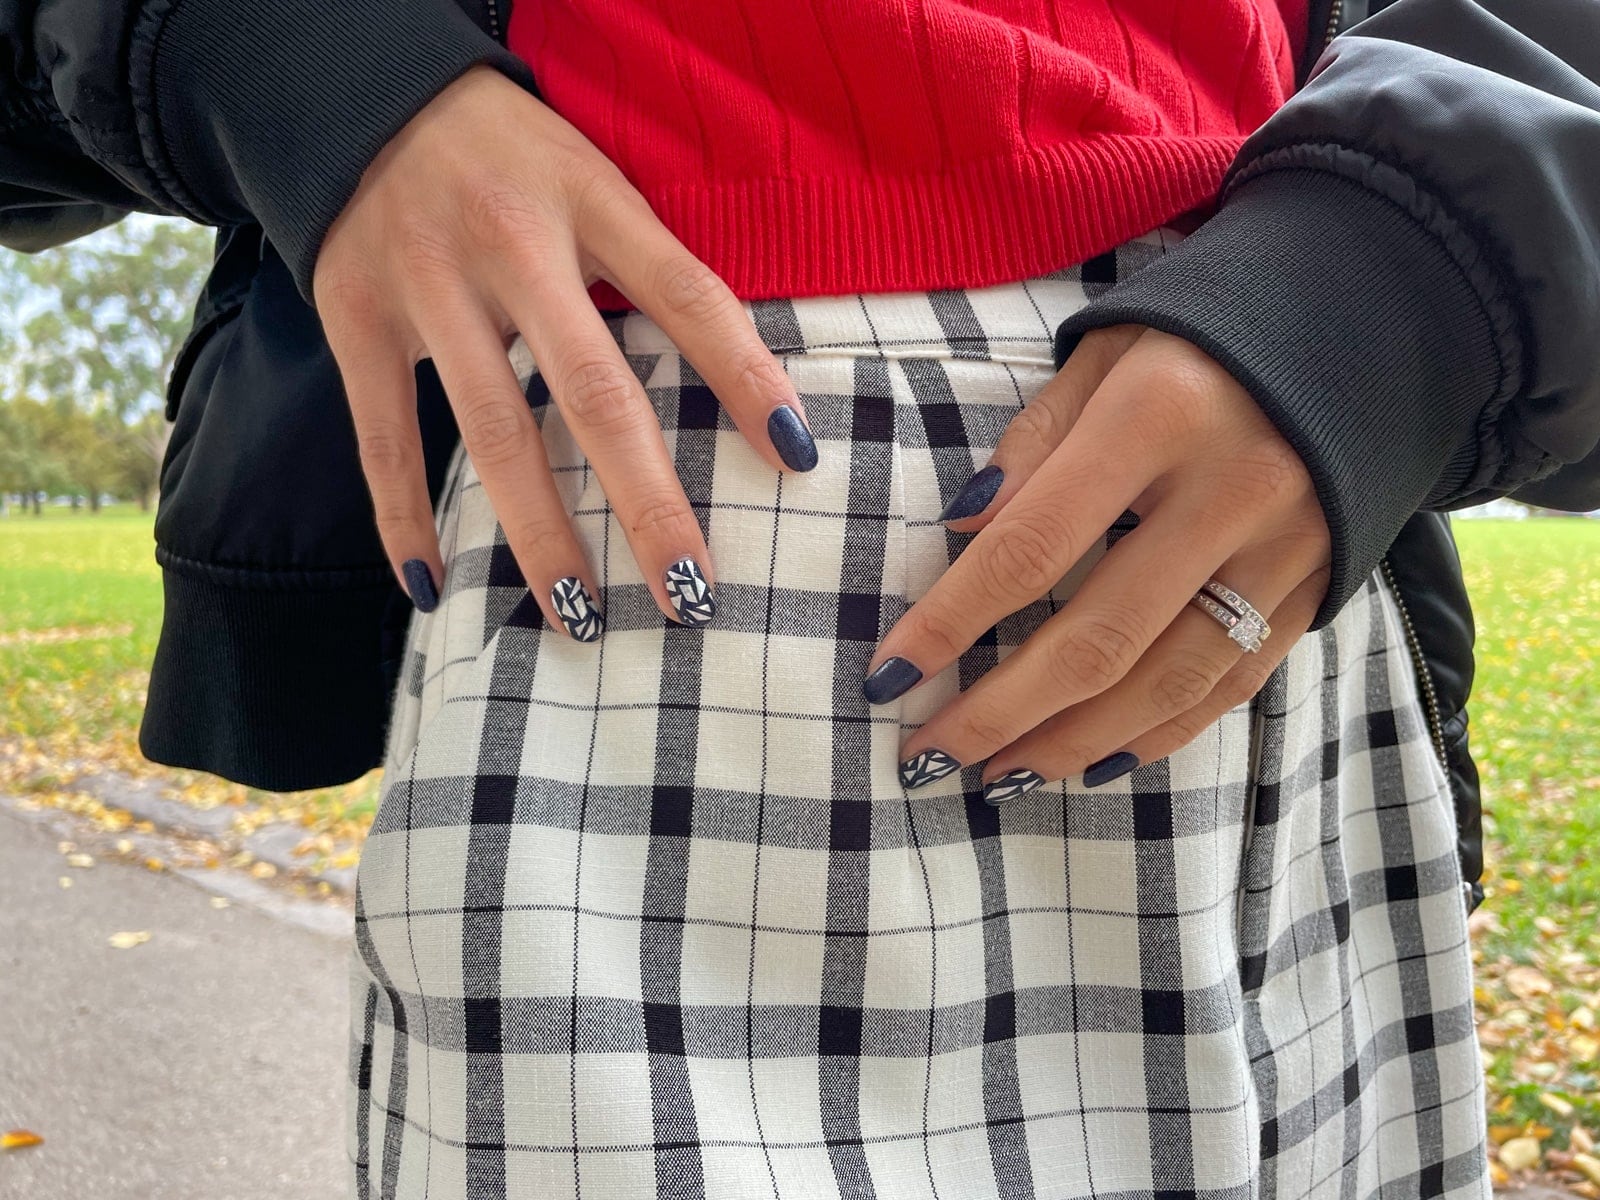 A close-up of a woman’s nail art, which is dark navy and slightly glittery, with some accent nails with silver geometric shapes. In the background is the woman’s black-and-white checkered shorts, and black lace-up boots.